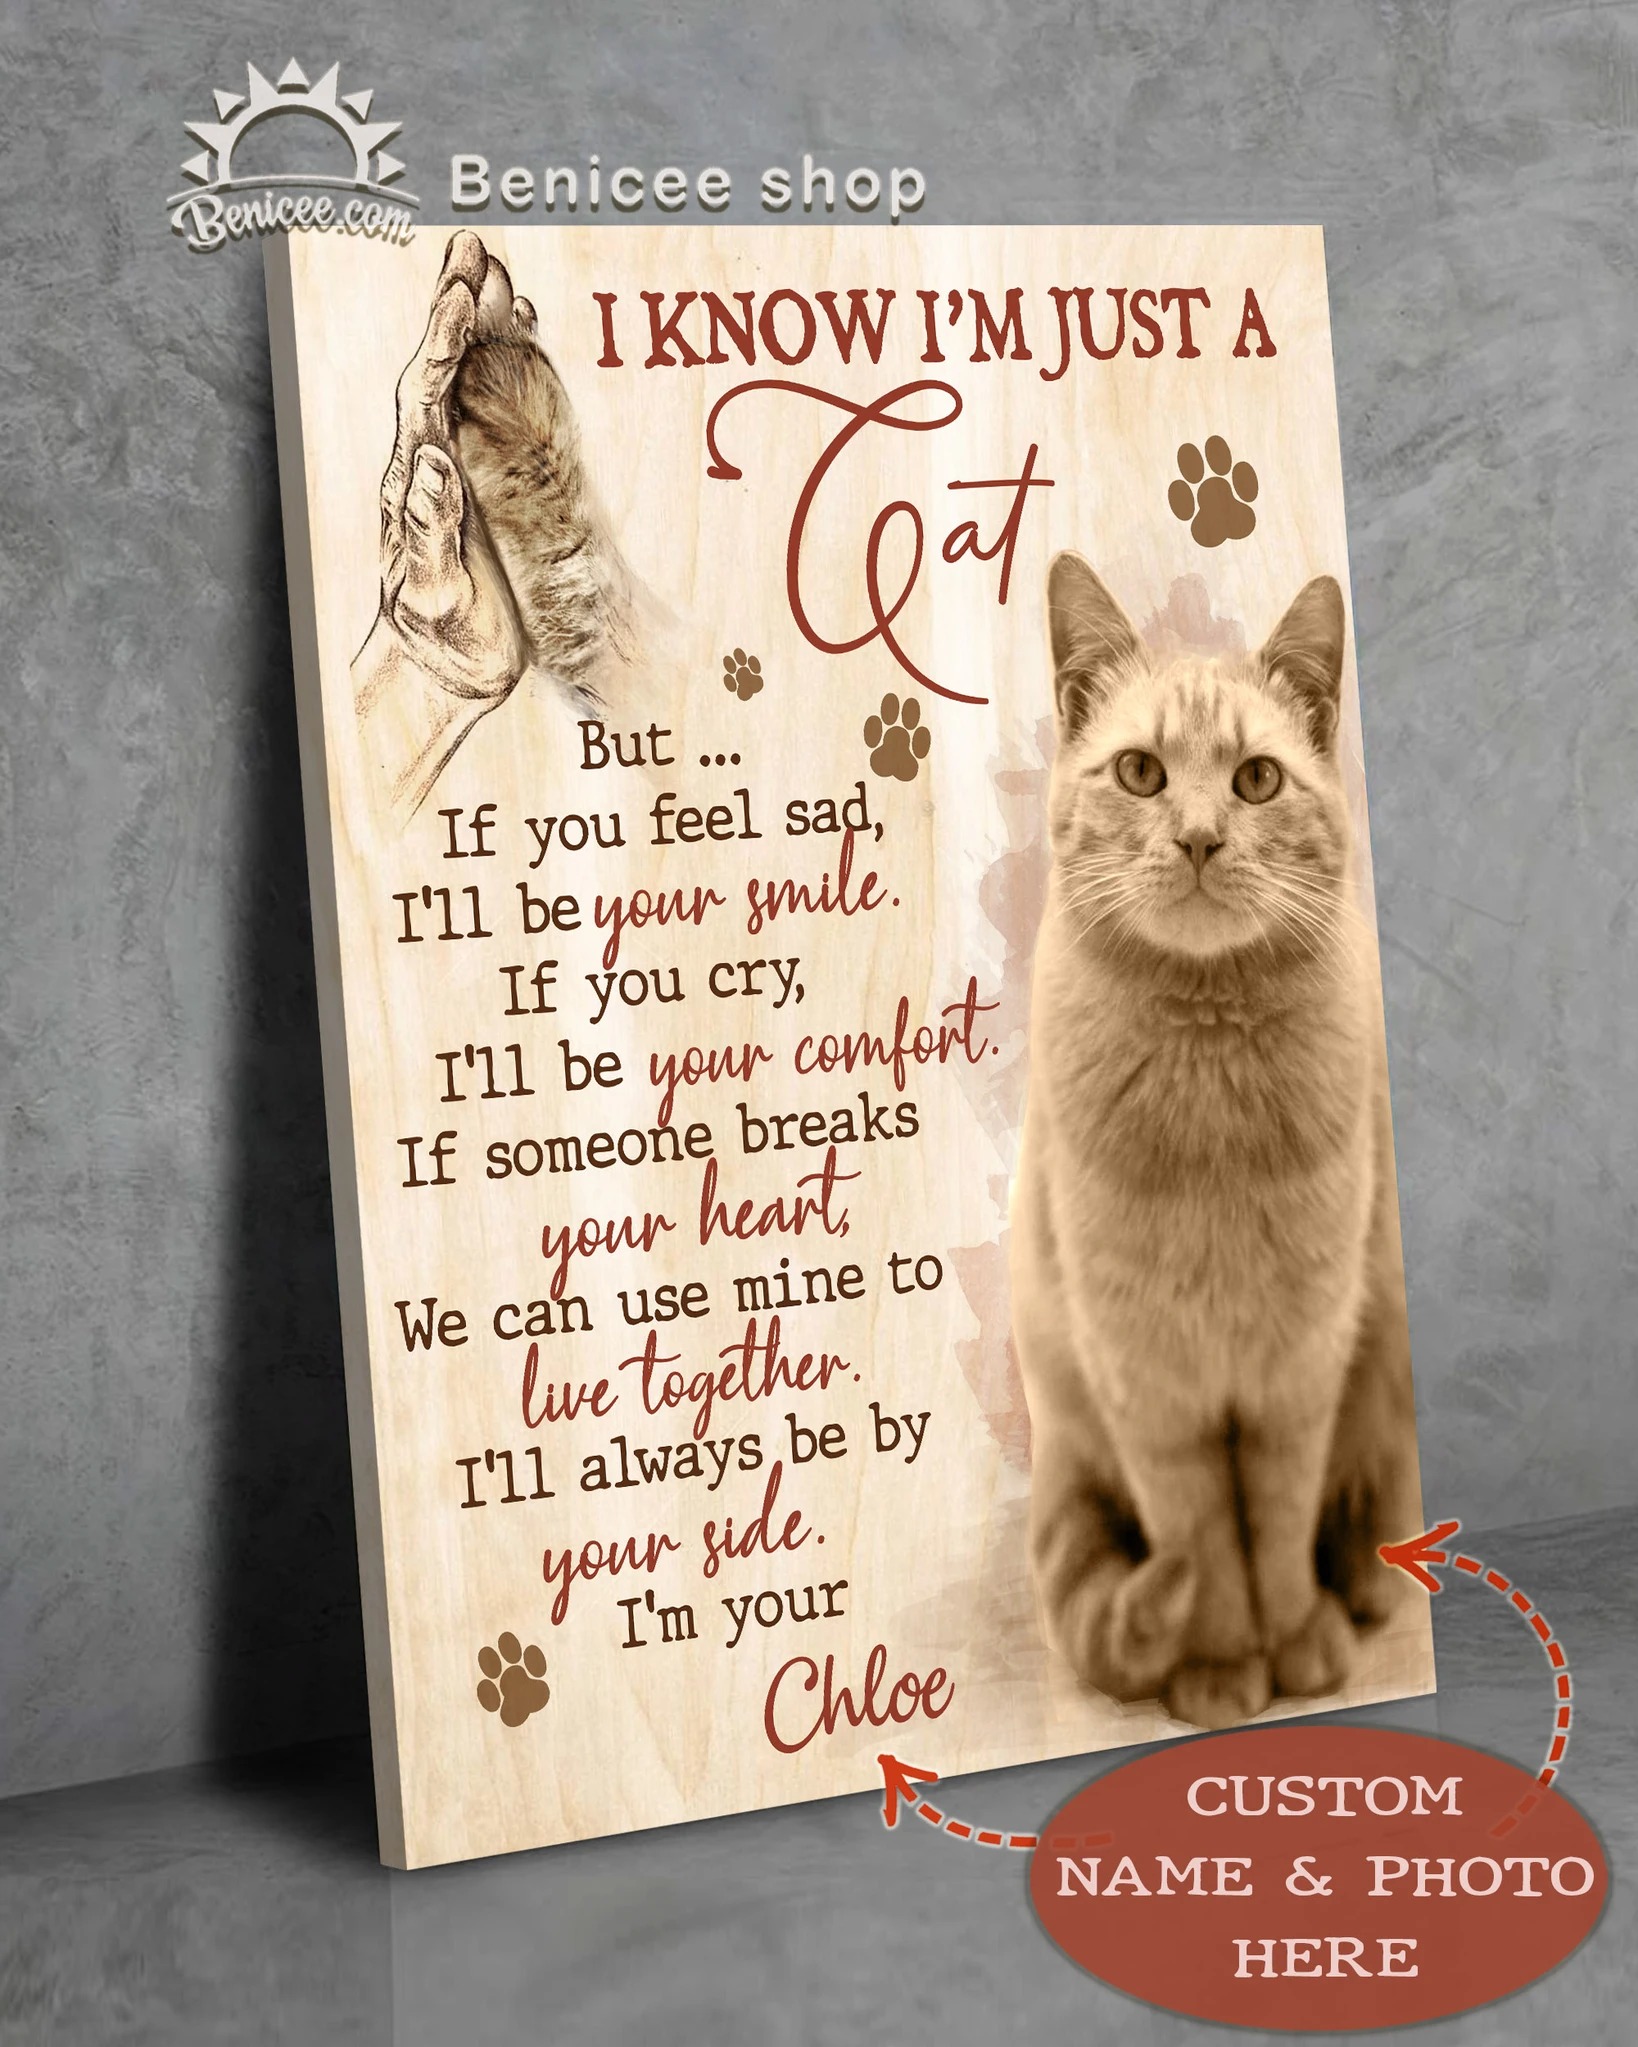 Custom photo and name i know i'm just a cat canvas prints 3